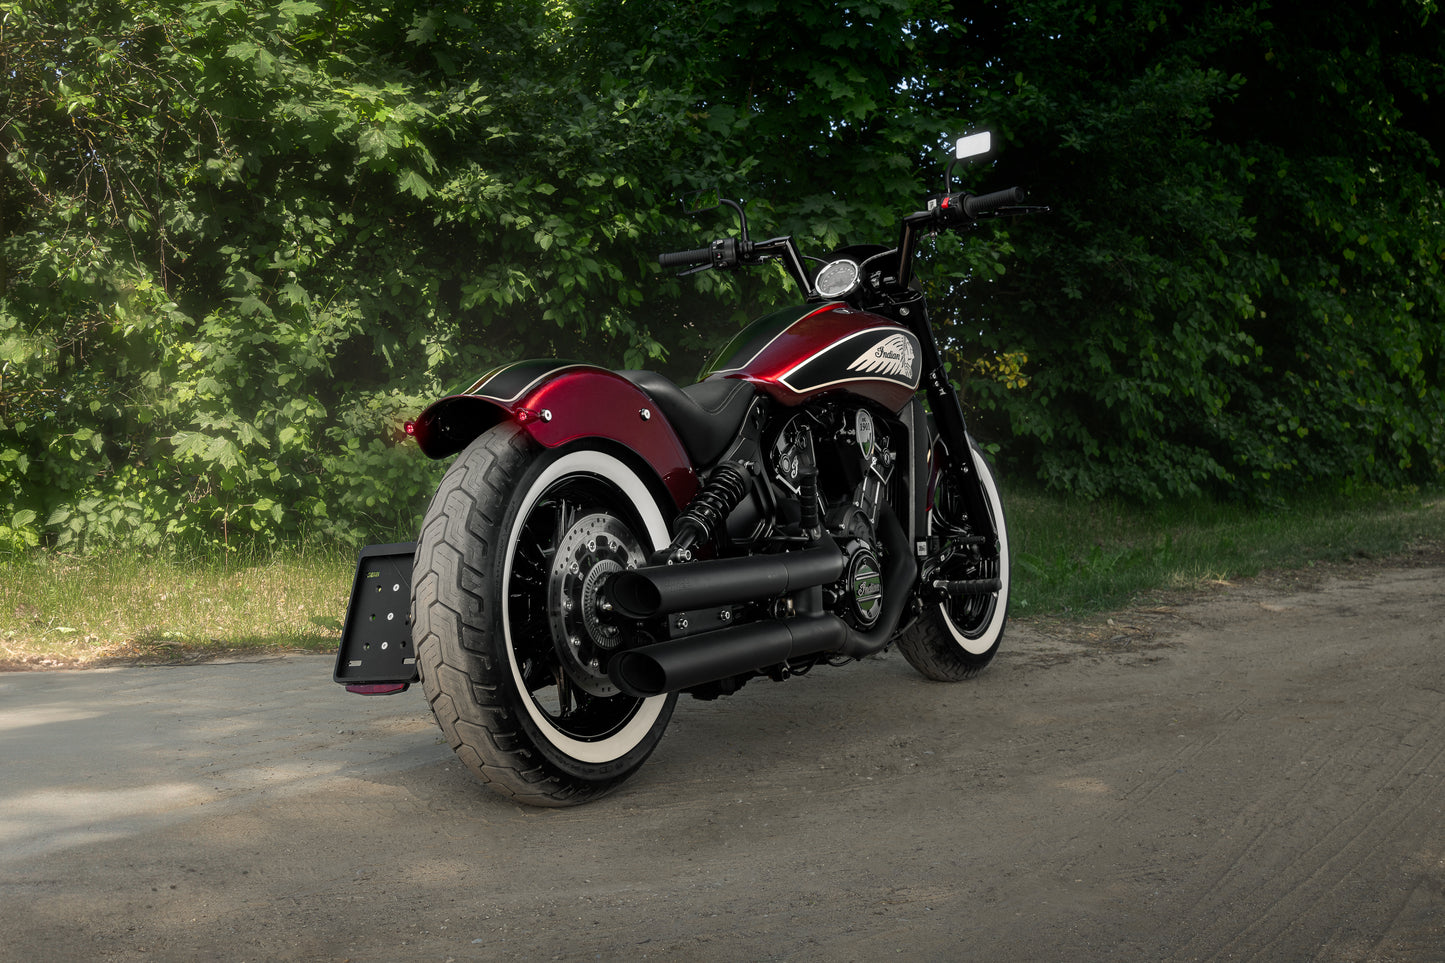 Harley Davidson motorcycle with Killer Custom "Apache II" rear fender from the rear by the side of the road with some trees in the background